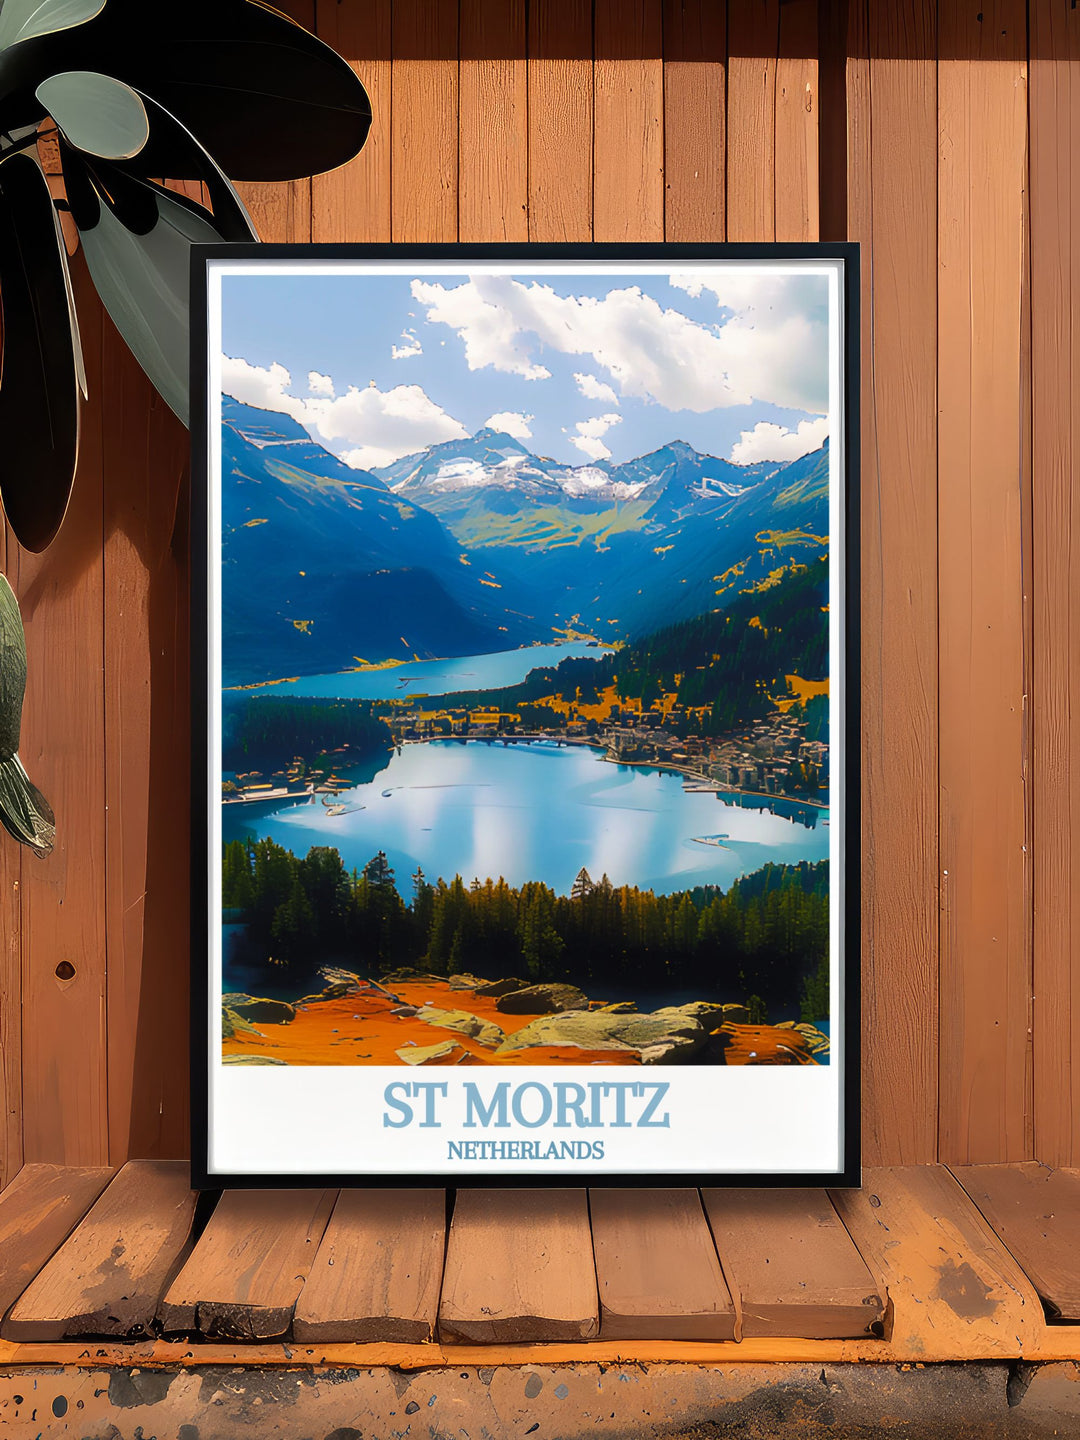 This travel poster captures the essence of St Moritz, renowned for its luxury and winter sports excellence, and the tranquil beauty of the Engadin Valley.